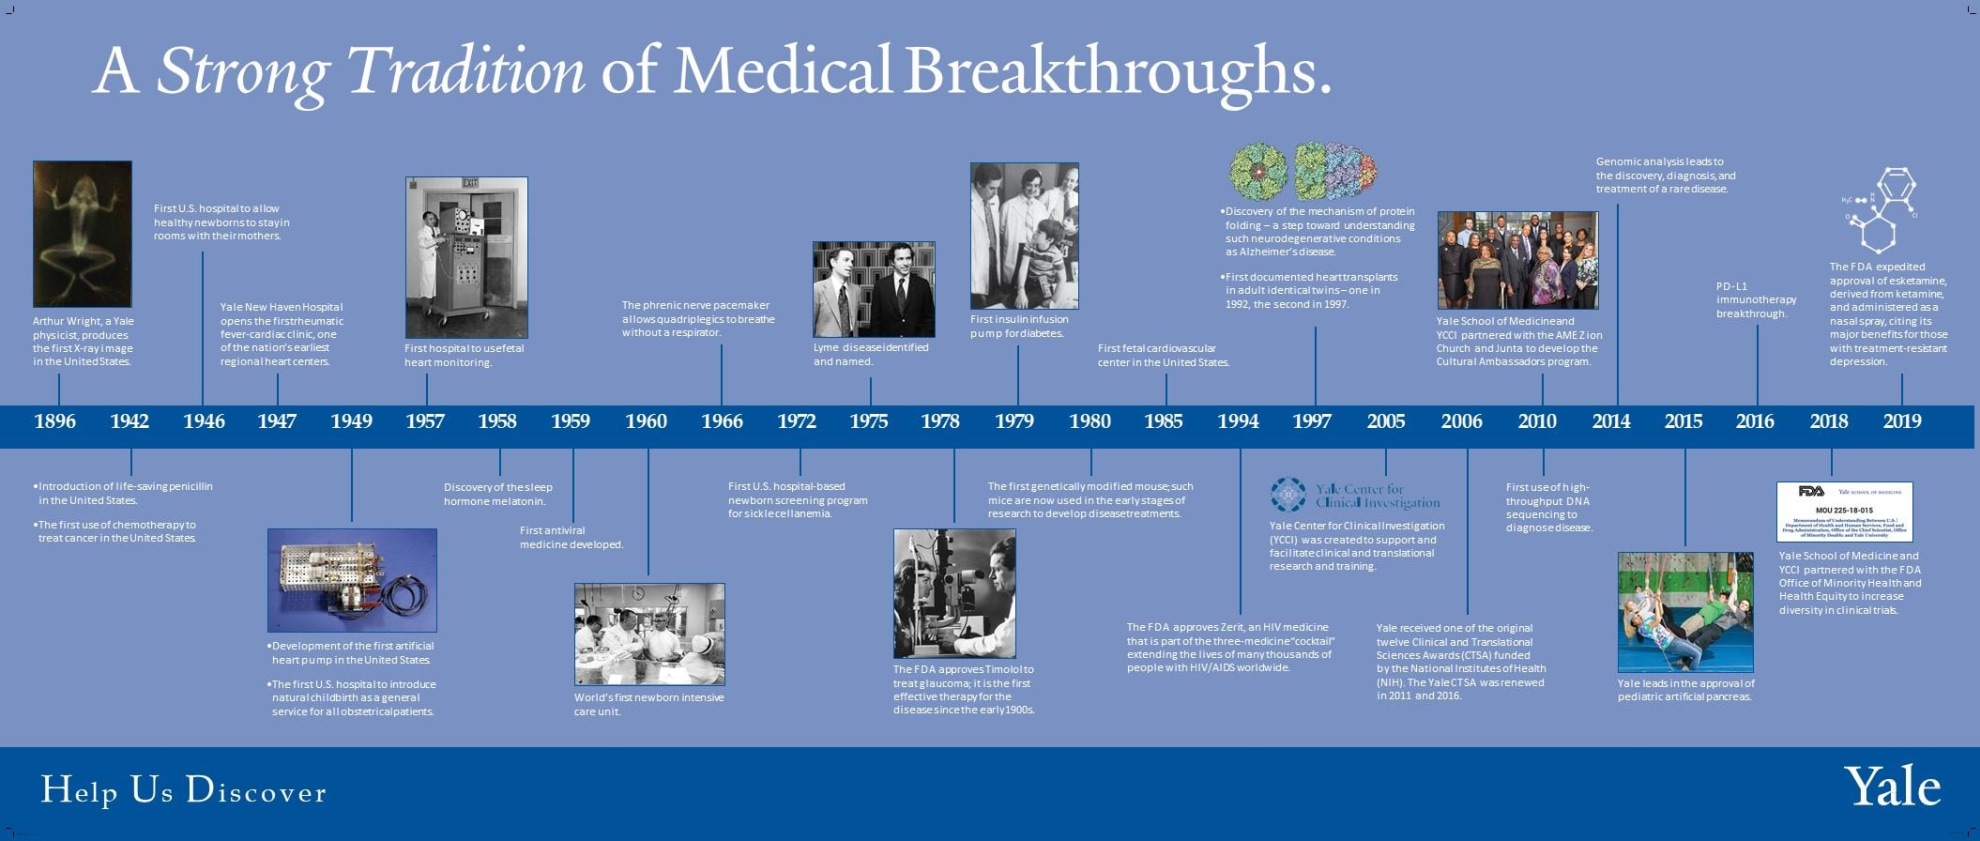 clinical research timeline history